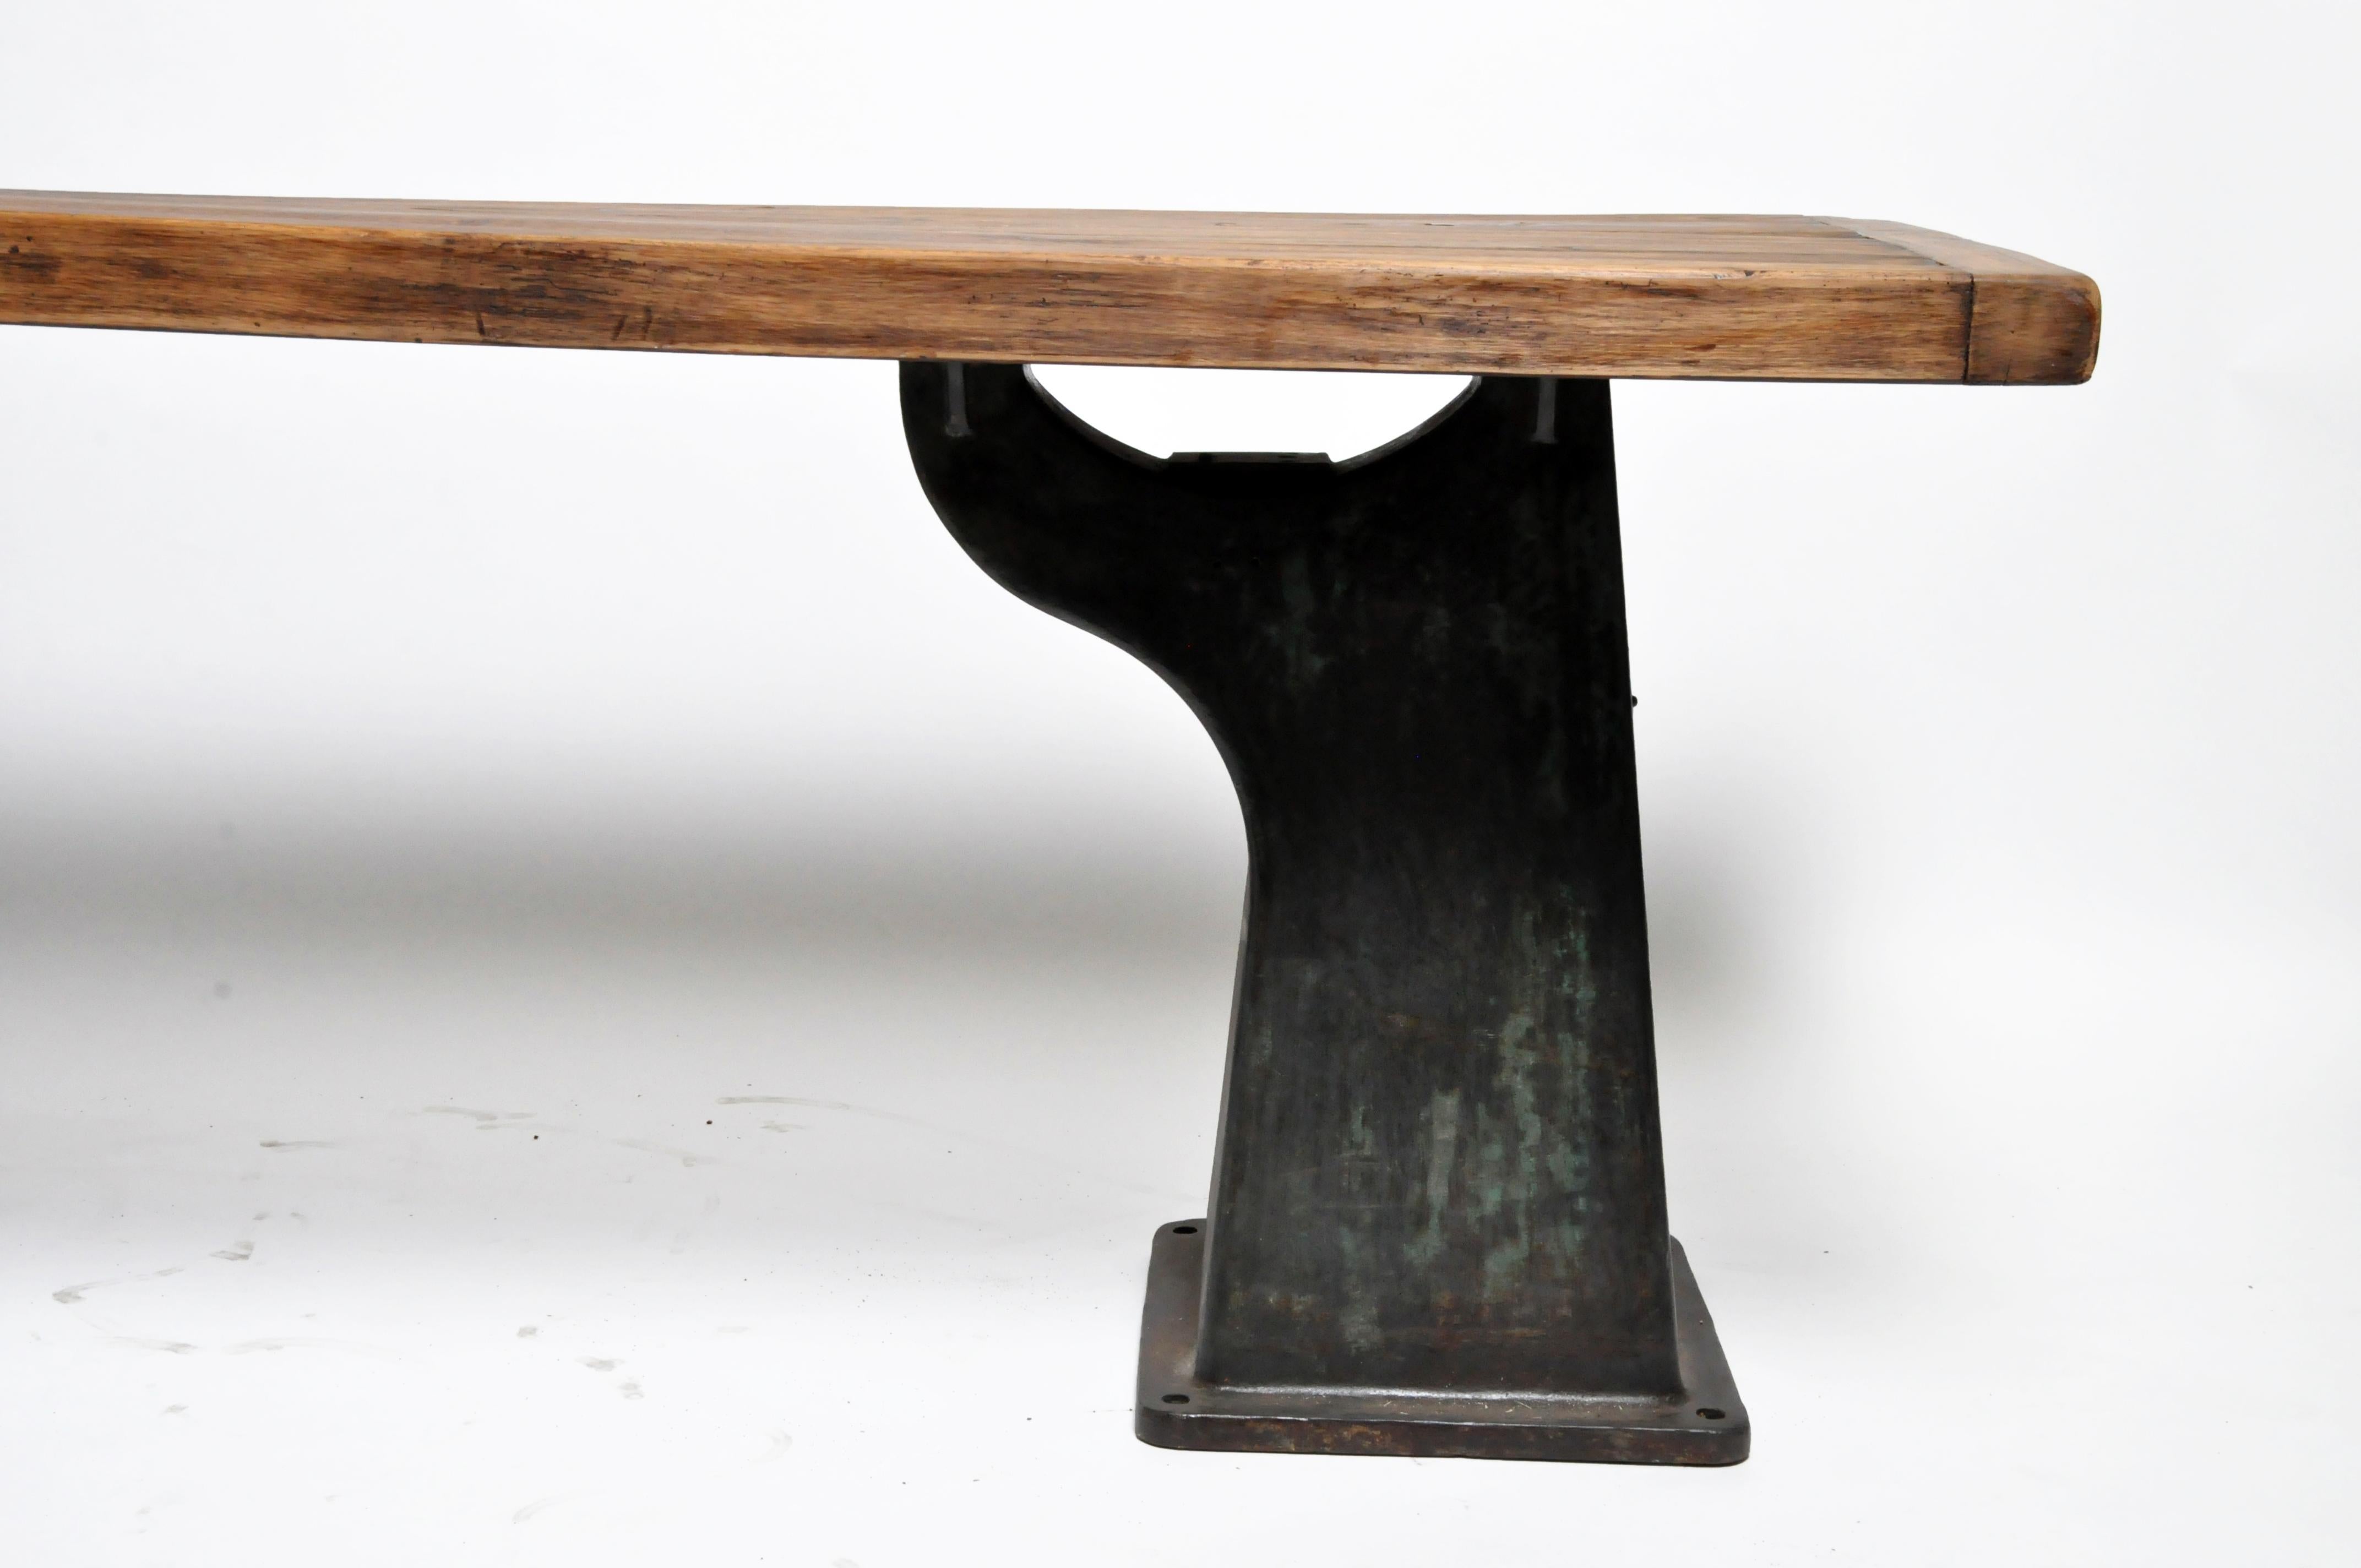 Acquired from a market in France, this massive Industrial work table features two metal bases, a wood top, and a metal plate with the stamp 